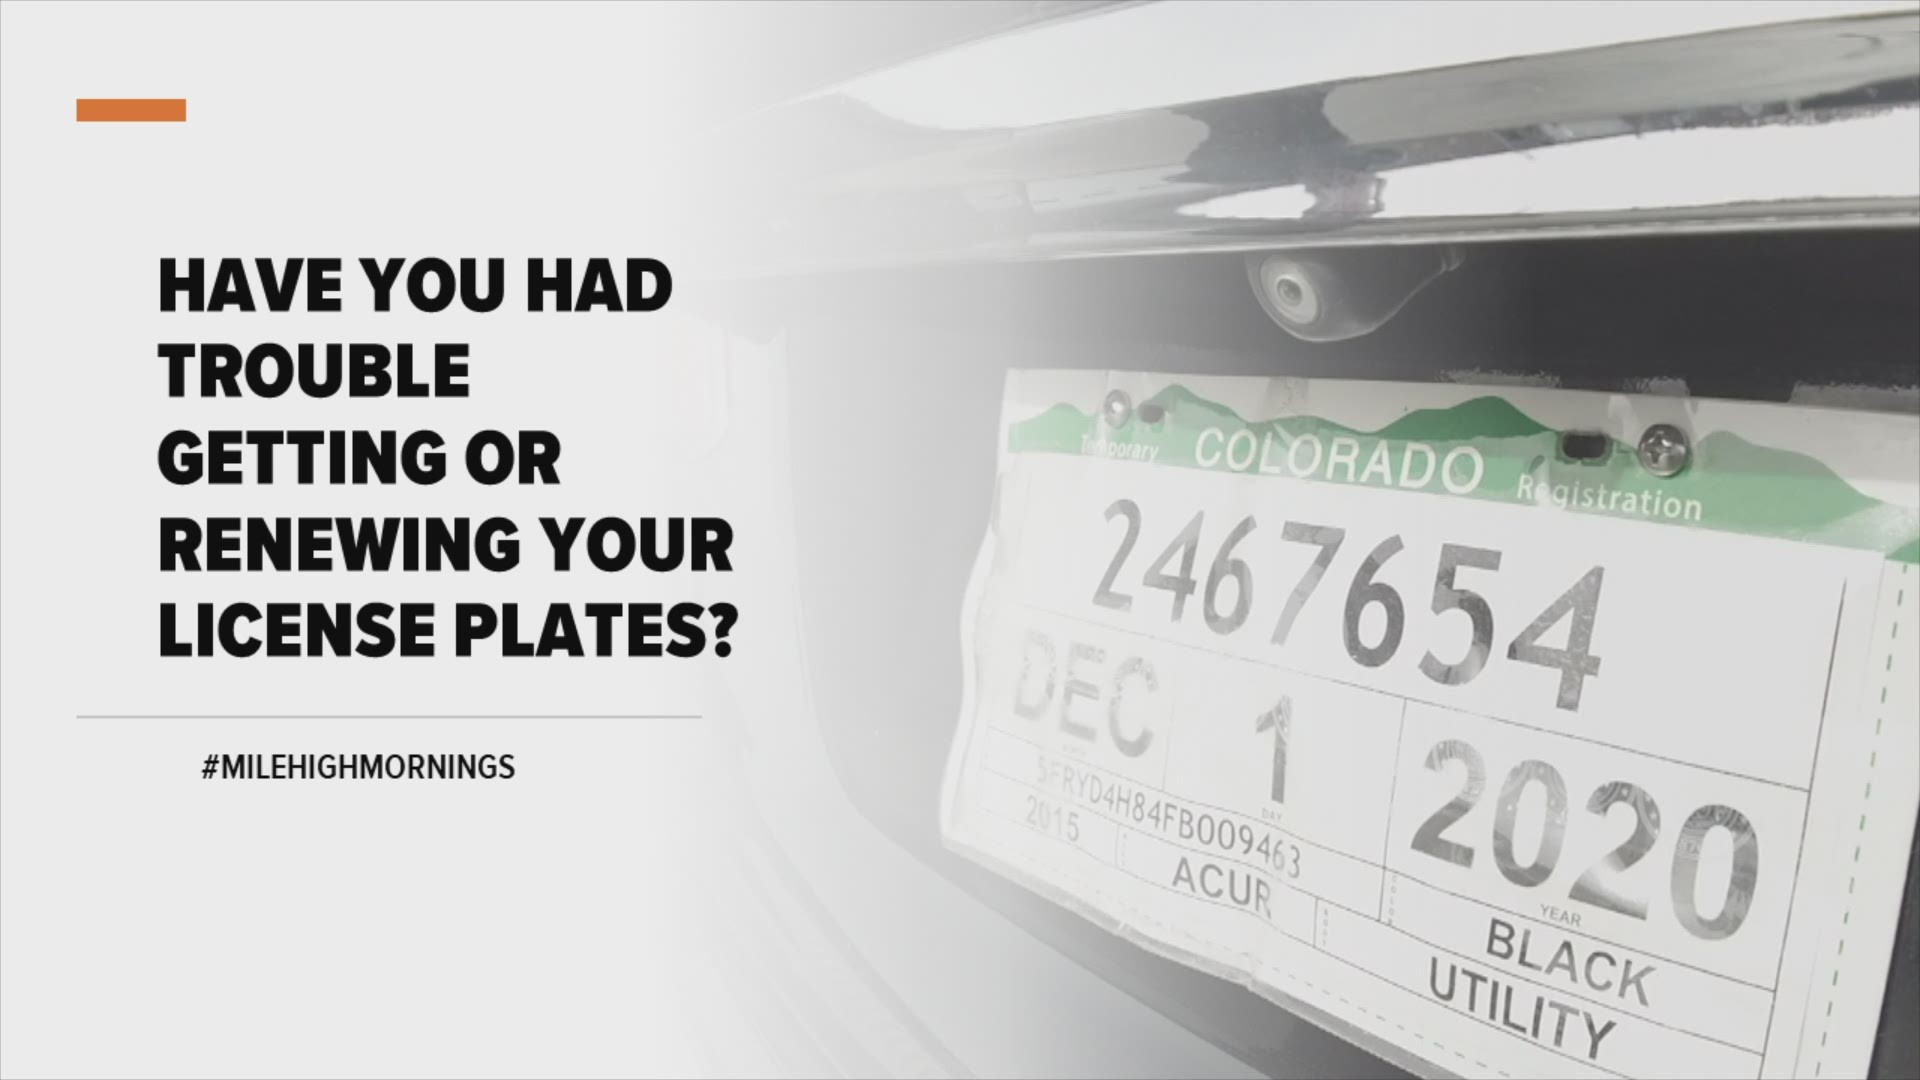 Denver will again stop issuing tickets to cars with expired license plates because of the backlog at the Colorado Department of Motor Vehicles.